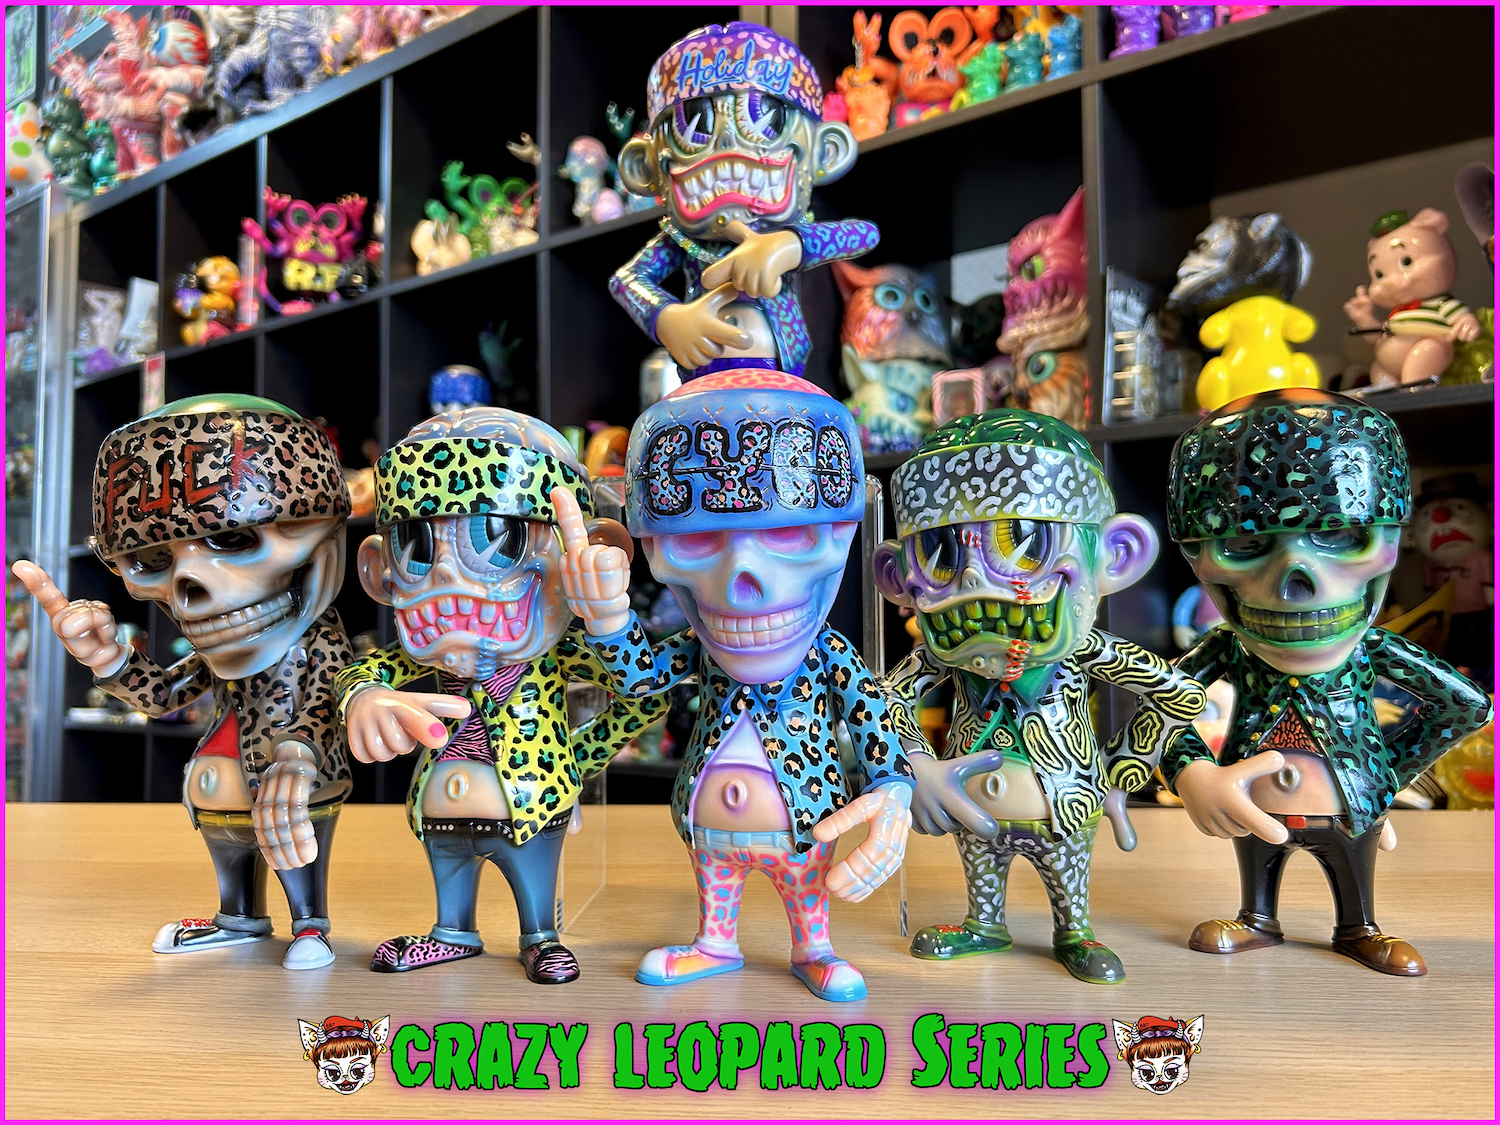 Crazy Leopard series one offs by Melo of BBT Lottery